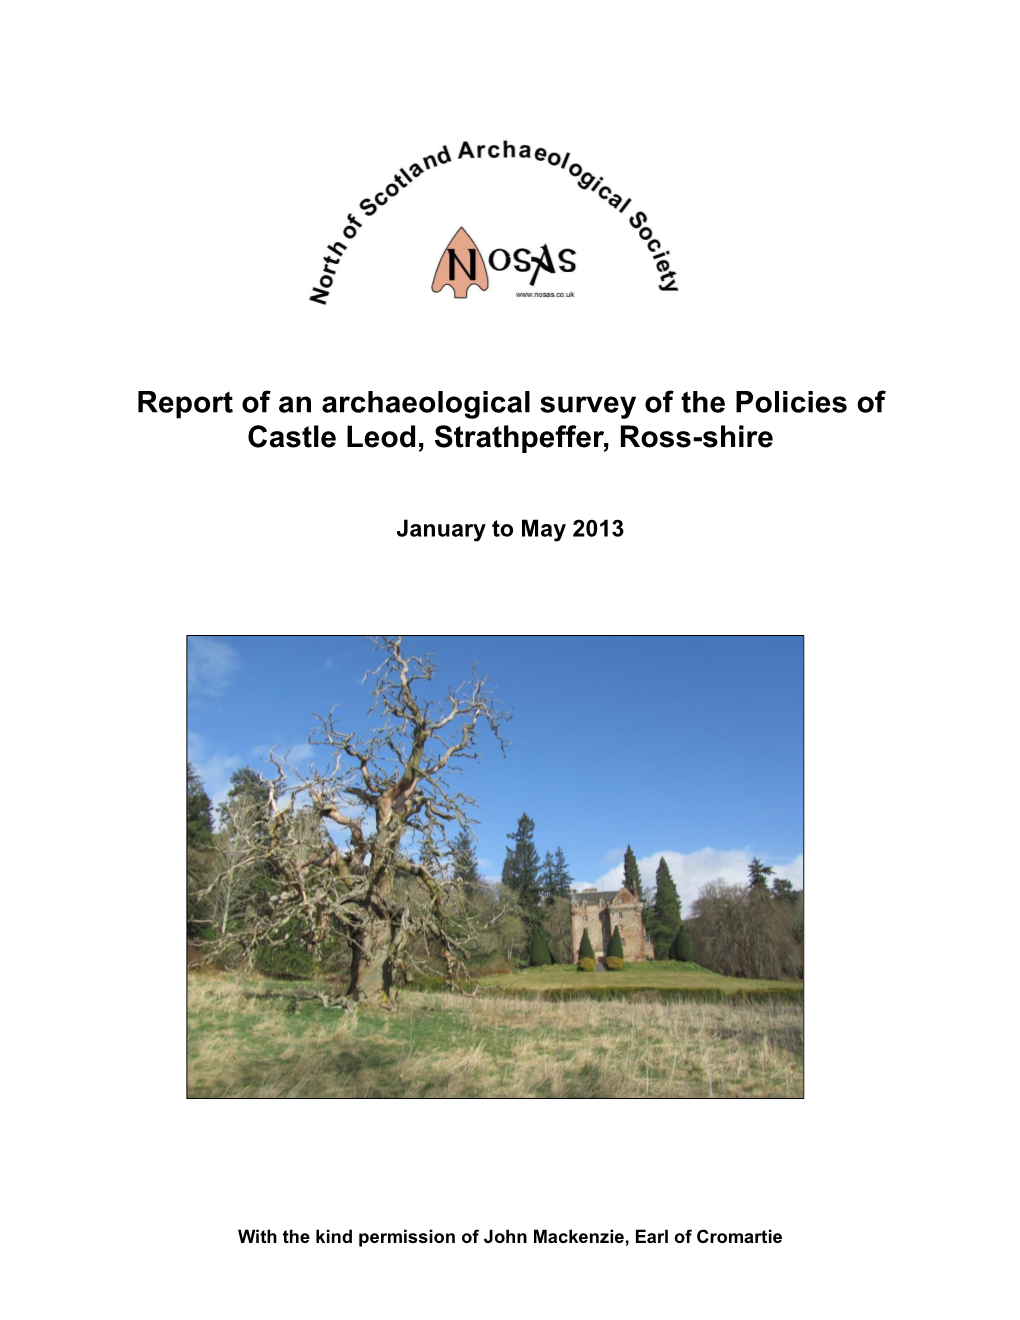 Report of an Archaeological Survey of the Policies of Castle Leod, Strathpeffer, Ross-Shire